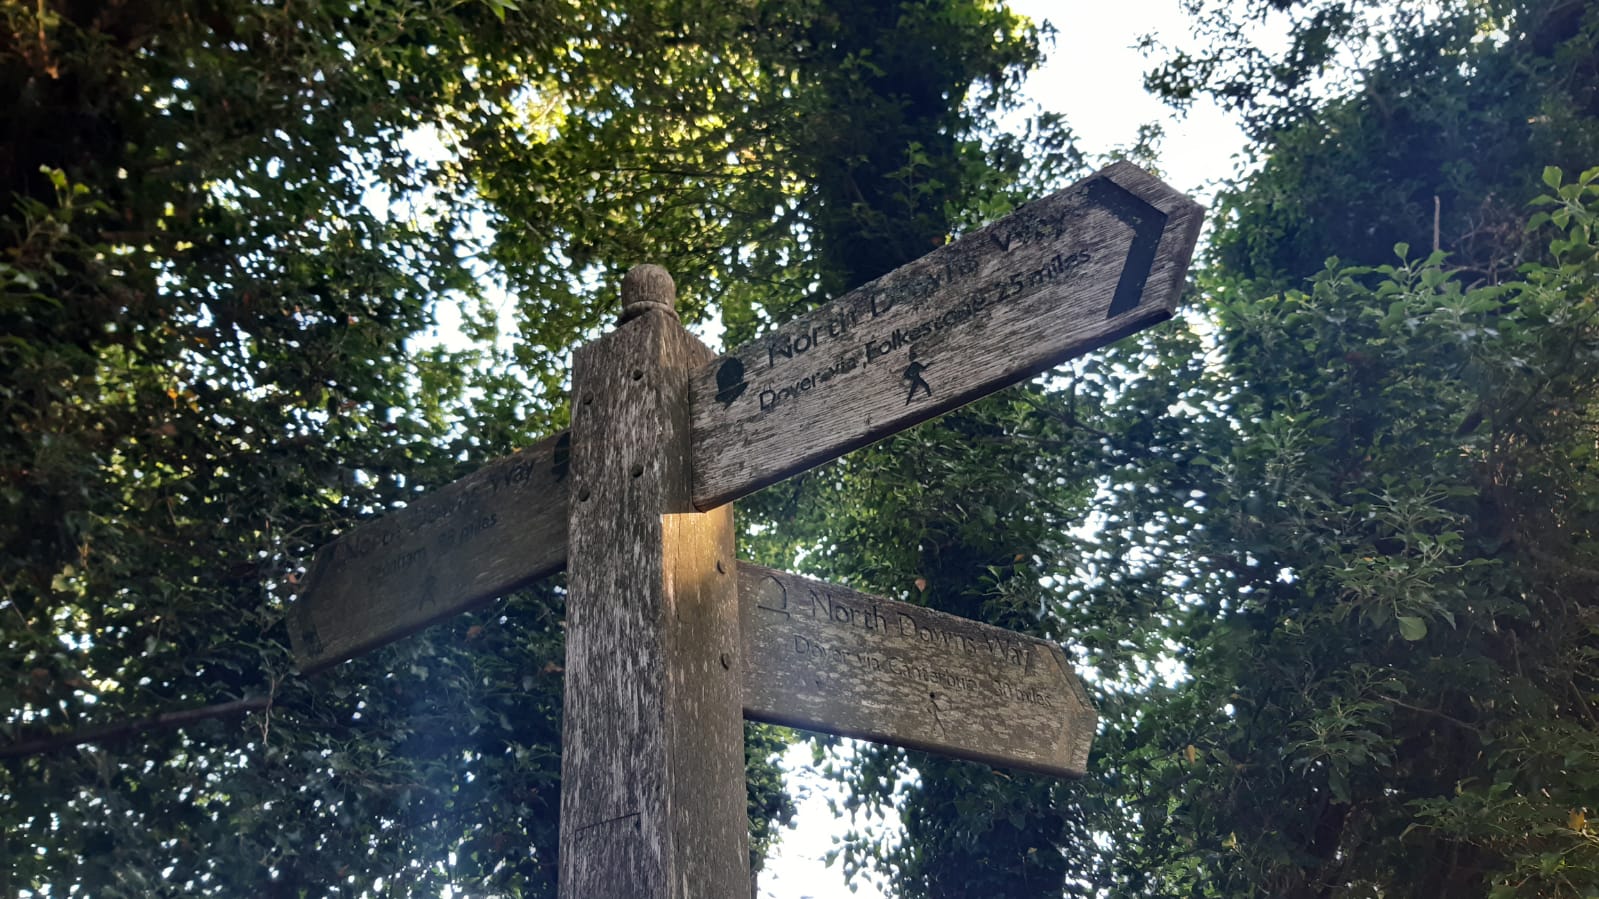 Worn wooden sign pointing the directions of the North Downs Way